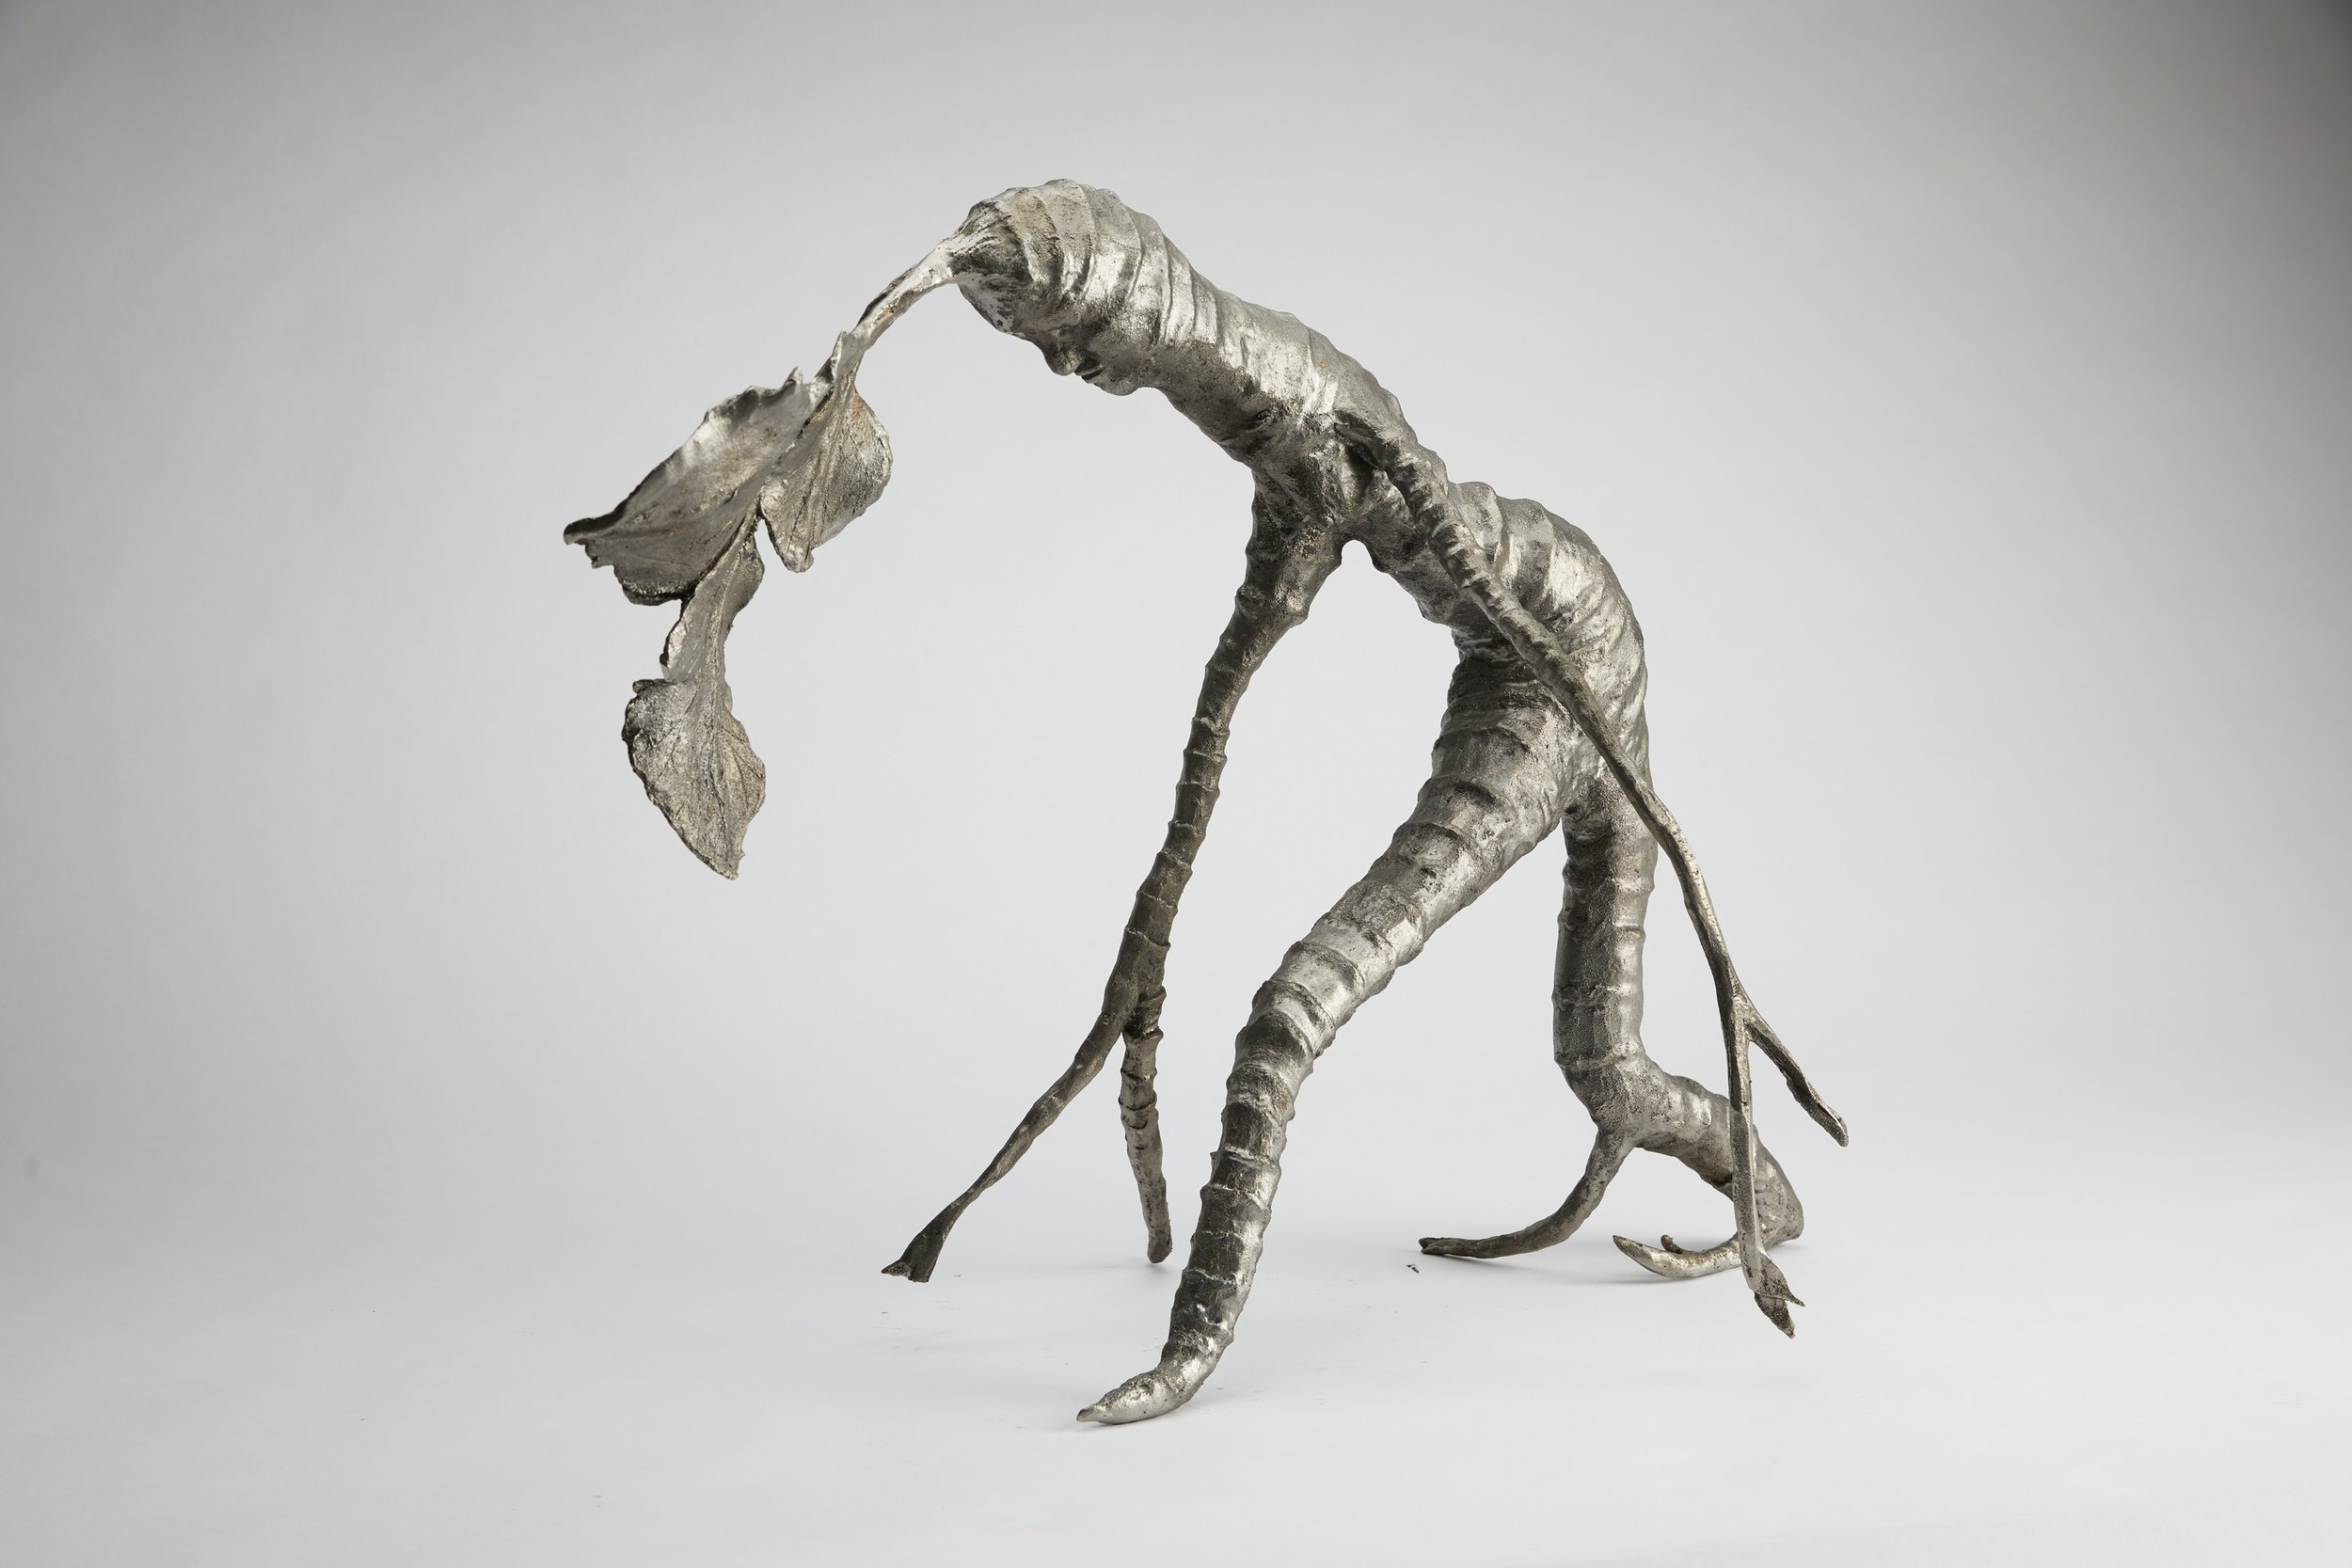  Liberated Root, 2020. Cast iron 15 x 20.5 x 19 in. (38.1 x 52.1 x 48.3 cm) 